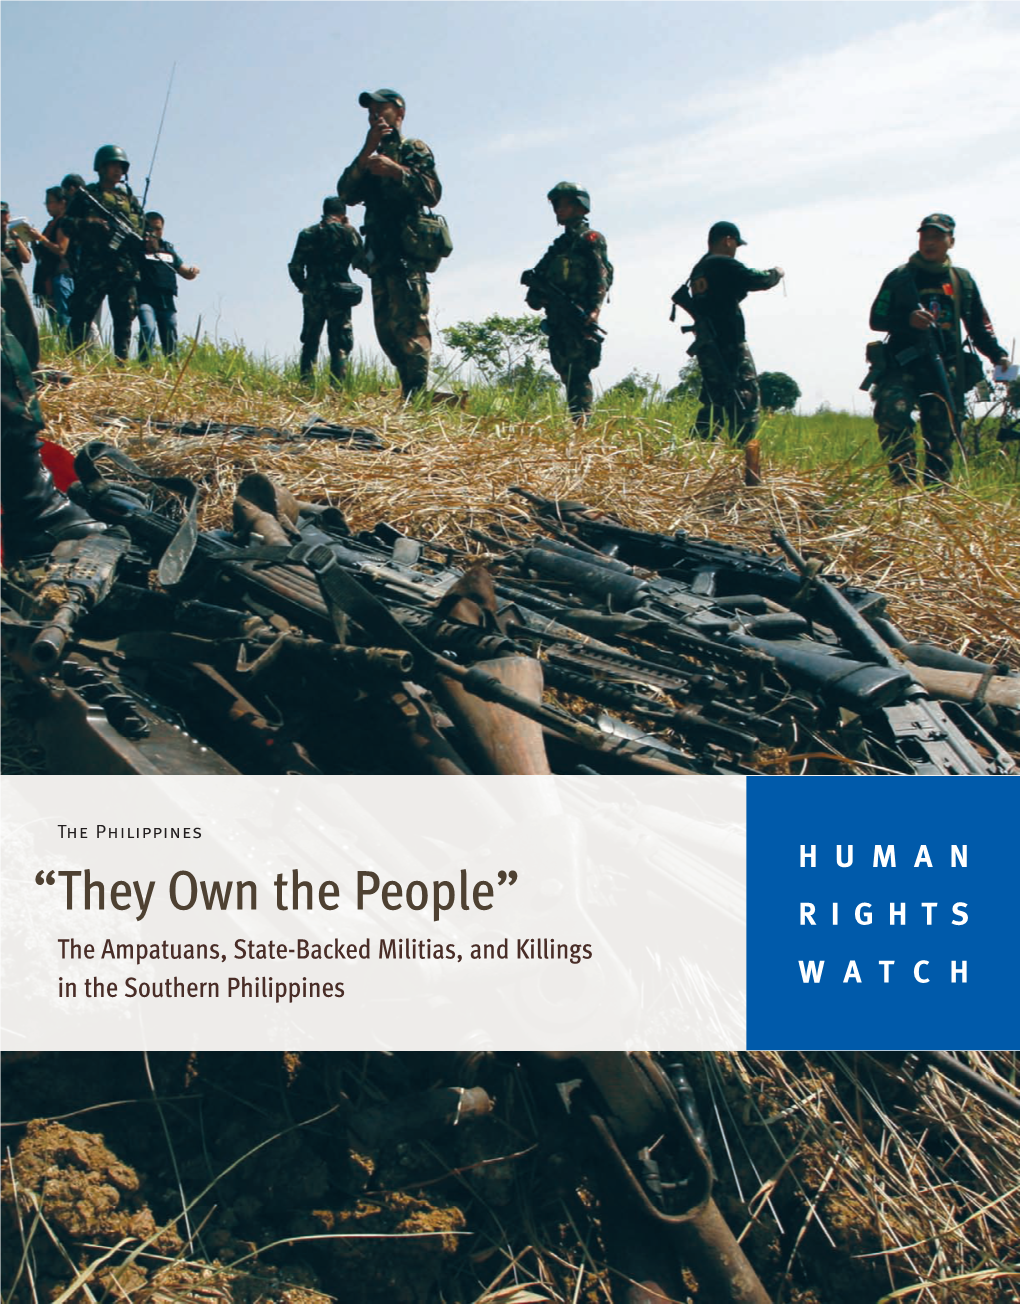 “They Own the People” RIGHTS RIGHTS WATCH HUMAN HUMAN ” “Insider Testimony Provided by Agal Agal Arroyo